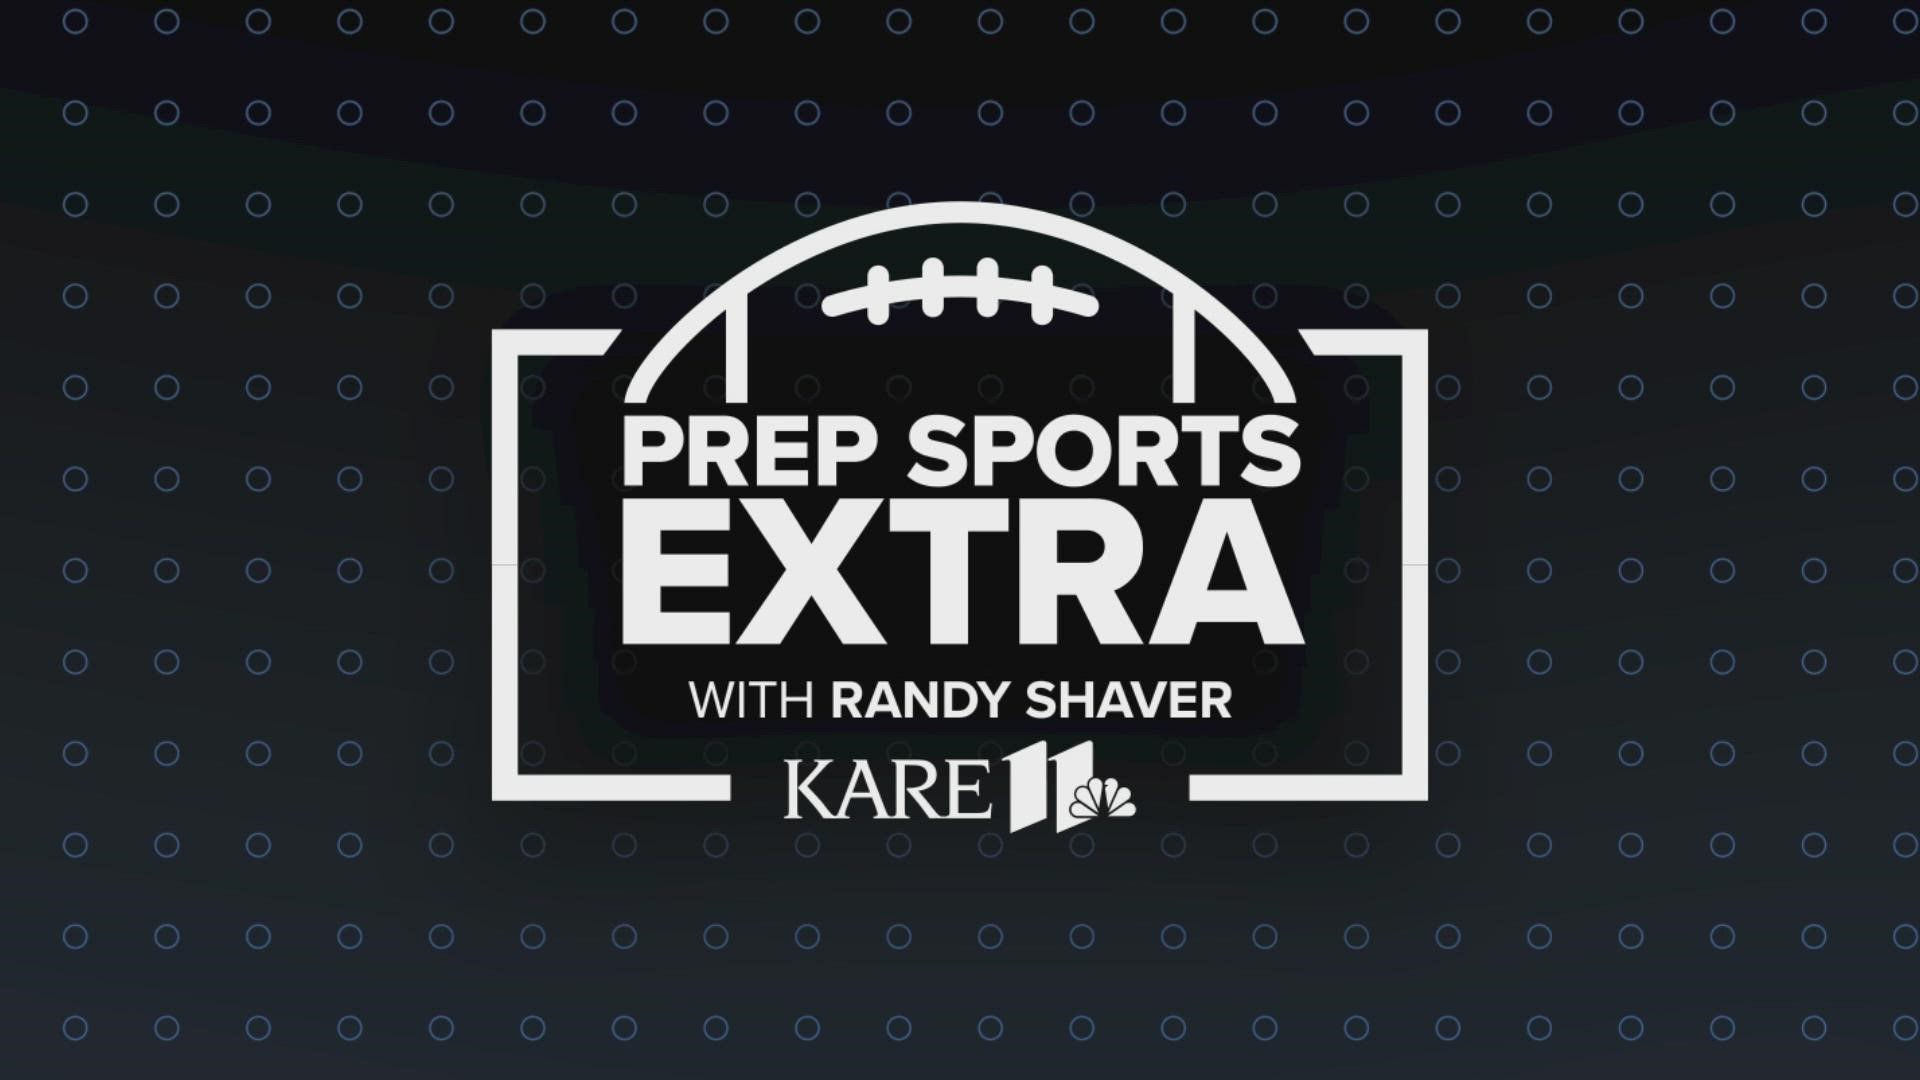 Randy Shaver is back for the 39th season of the KARE 11 Prep Sports Extra, where he'll feature highlights from tonight's playoff action.